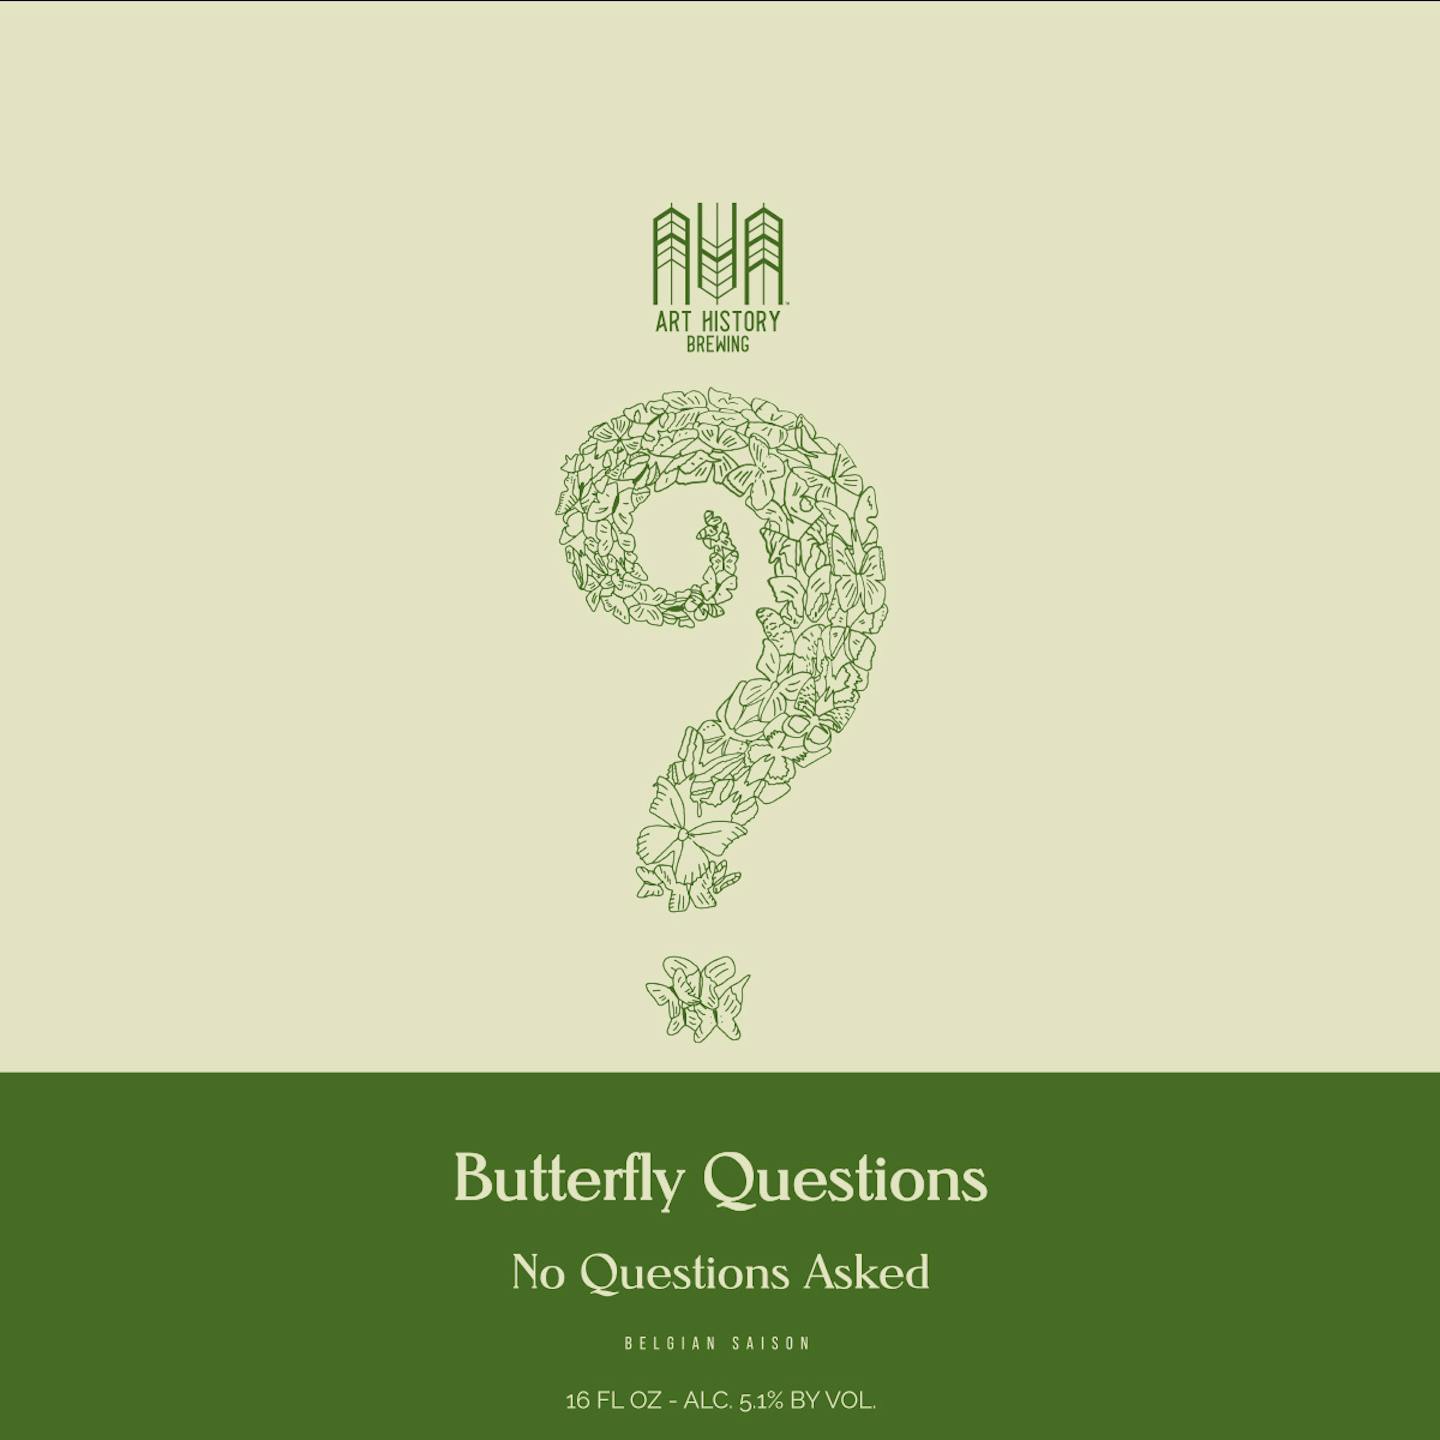 butterflyquestions-noquestionsasked